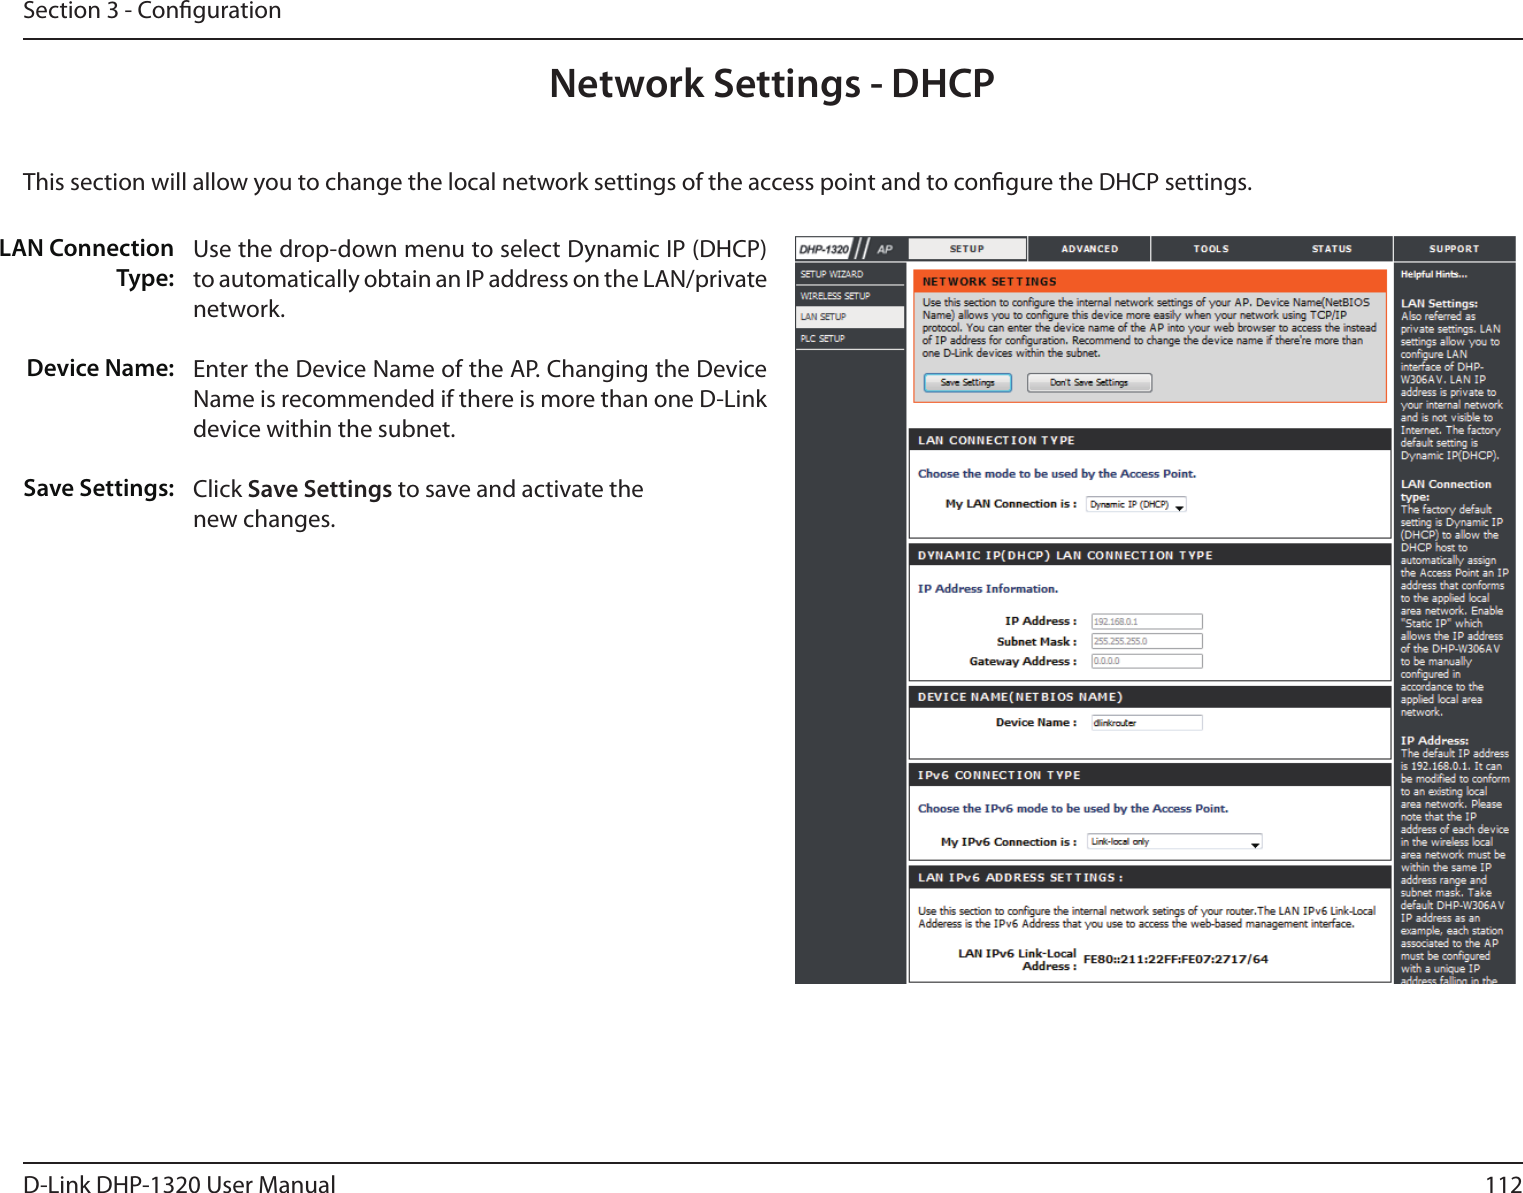 112D-Link DHP-1320 User ManualSection 3 - CongurationNetwork Settings - DHCPThis section will allow you to change the local network settings of the access point and to congure the DHCP settings.LAN ConnectionType:Device Name:Save Settings:Use the drop-down menu to select Dynamic IP (DHCP) to automatically obtain an IP address on the LAN/private network.Enter the Device Name of the AP. Changing the Device Name is recommended if there is more than one D-Link device within the subnet.Click Save Settings to save and activate thenew changes.